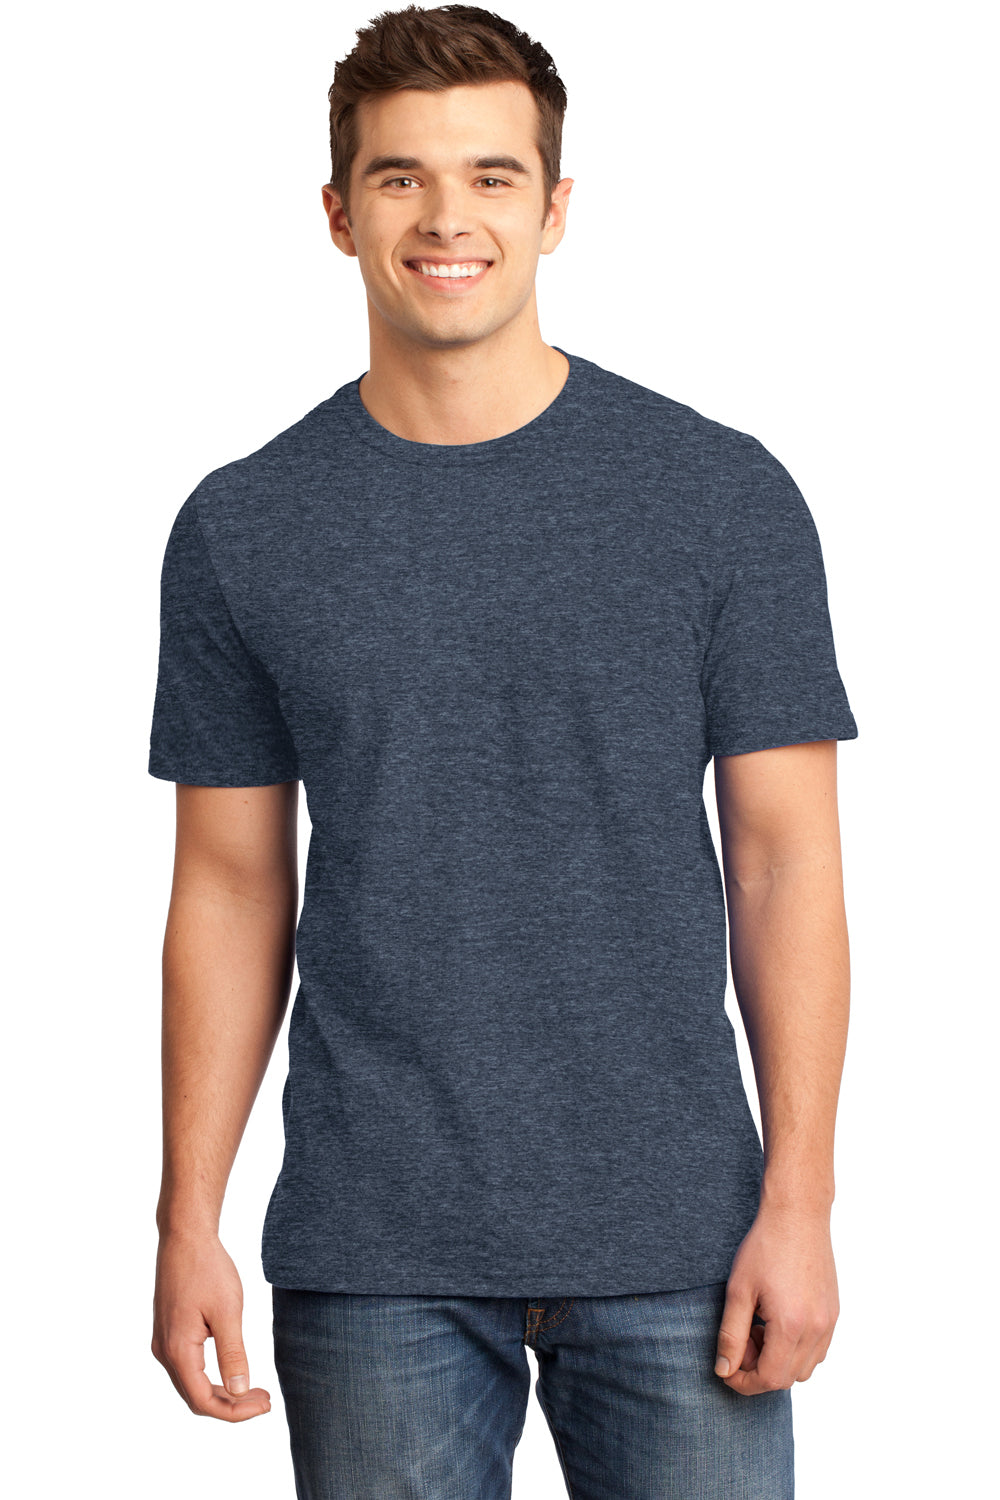 District DT6000 Mens Heather Navy Blue Very Important Short Sleeve